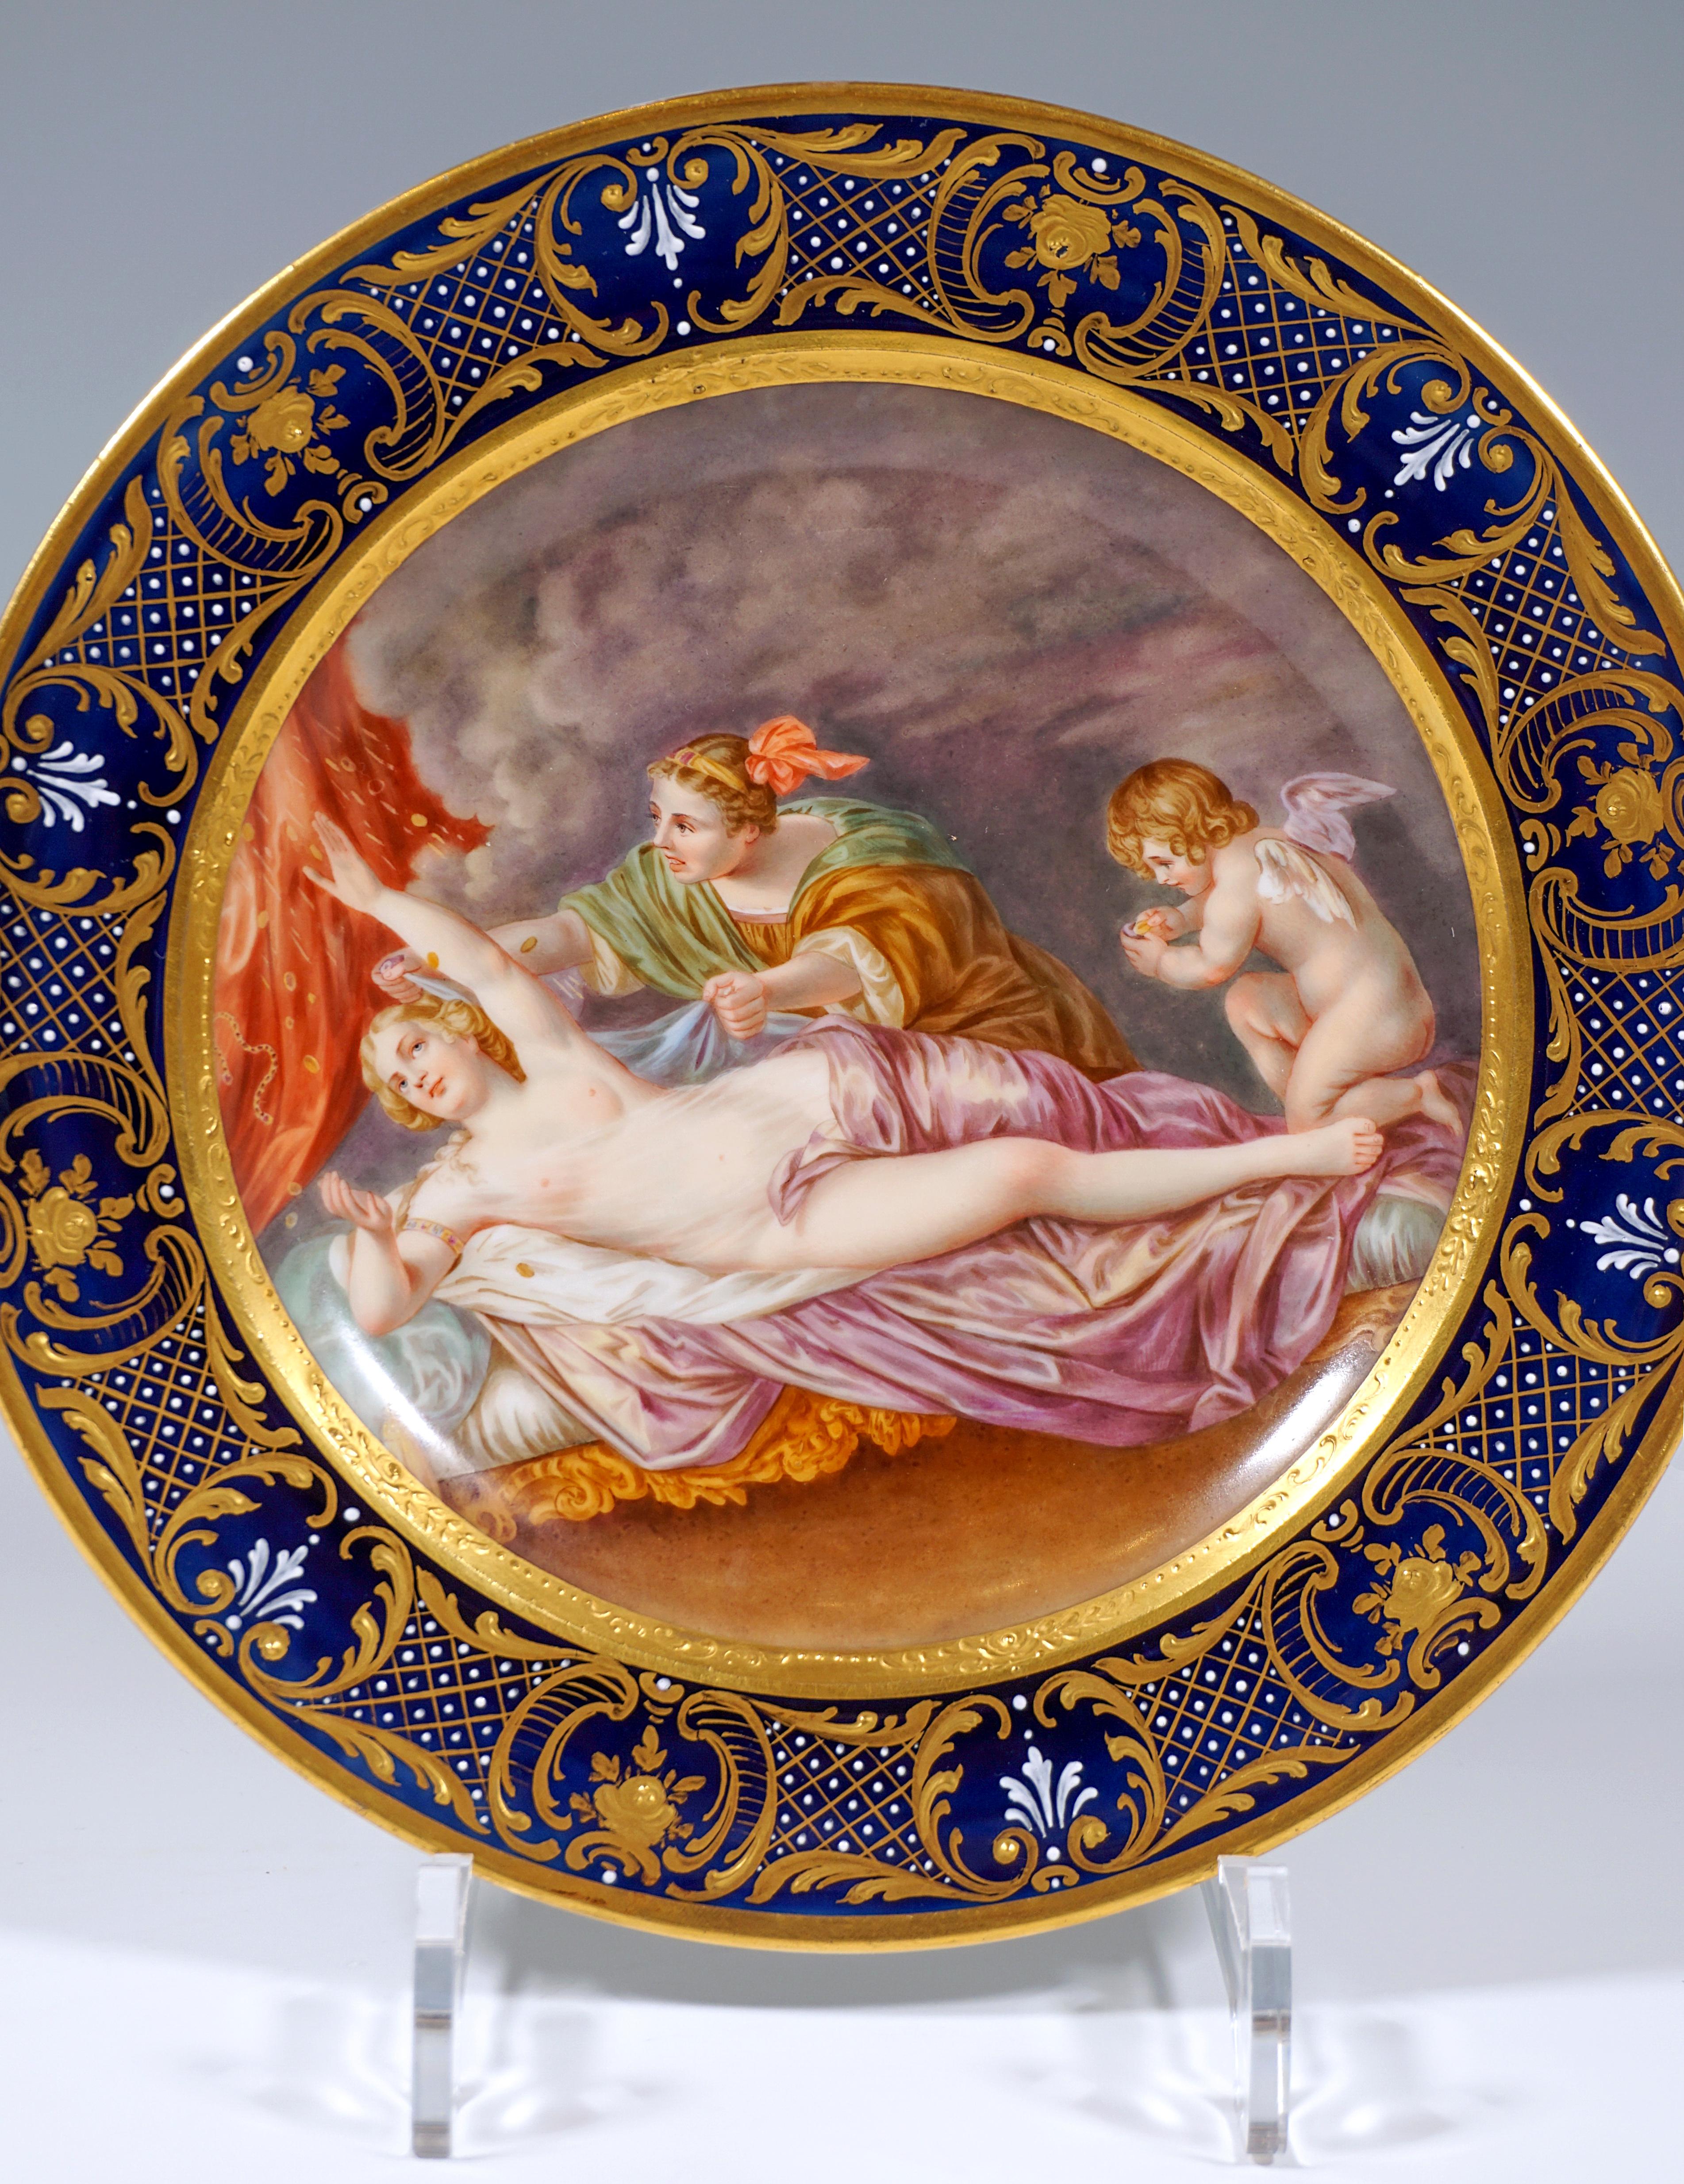 Exceptionally decorated porcelain plate:
Center of the porcelain plate fully decorated with the delicately painted image of Danae after a painting by Anthonis van Dyck in the finest polychrome painting, framed by a matte gold-pastos painted band